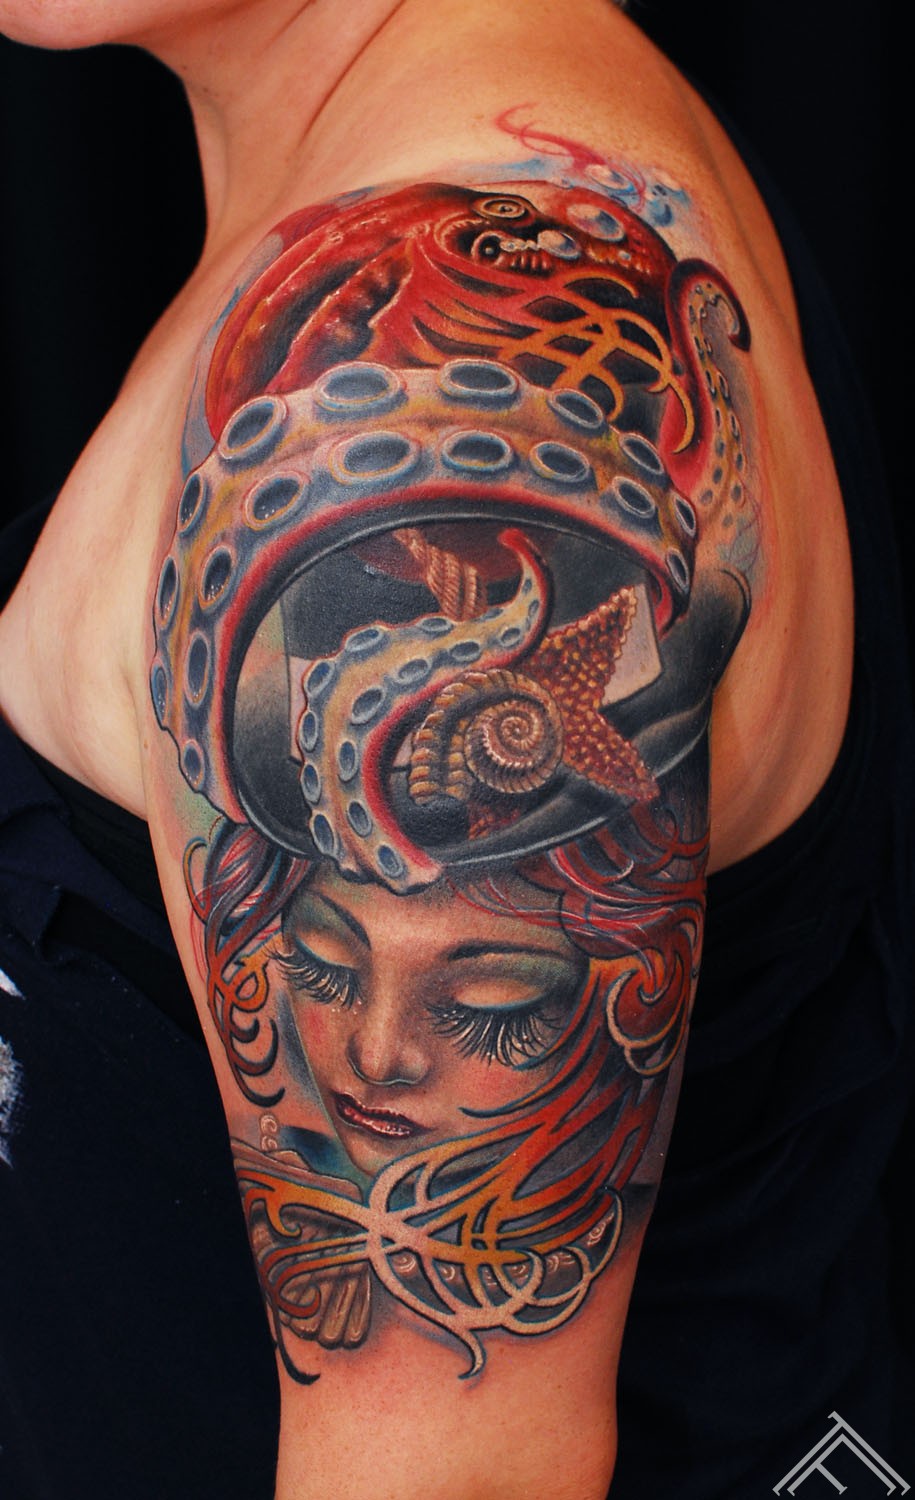 octopus_tophat_woman_nouveau_art_tattoo_tattoofrequency_clean